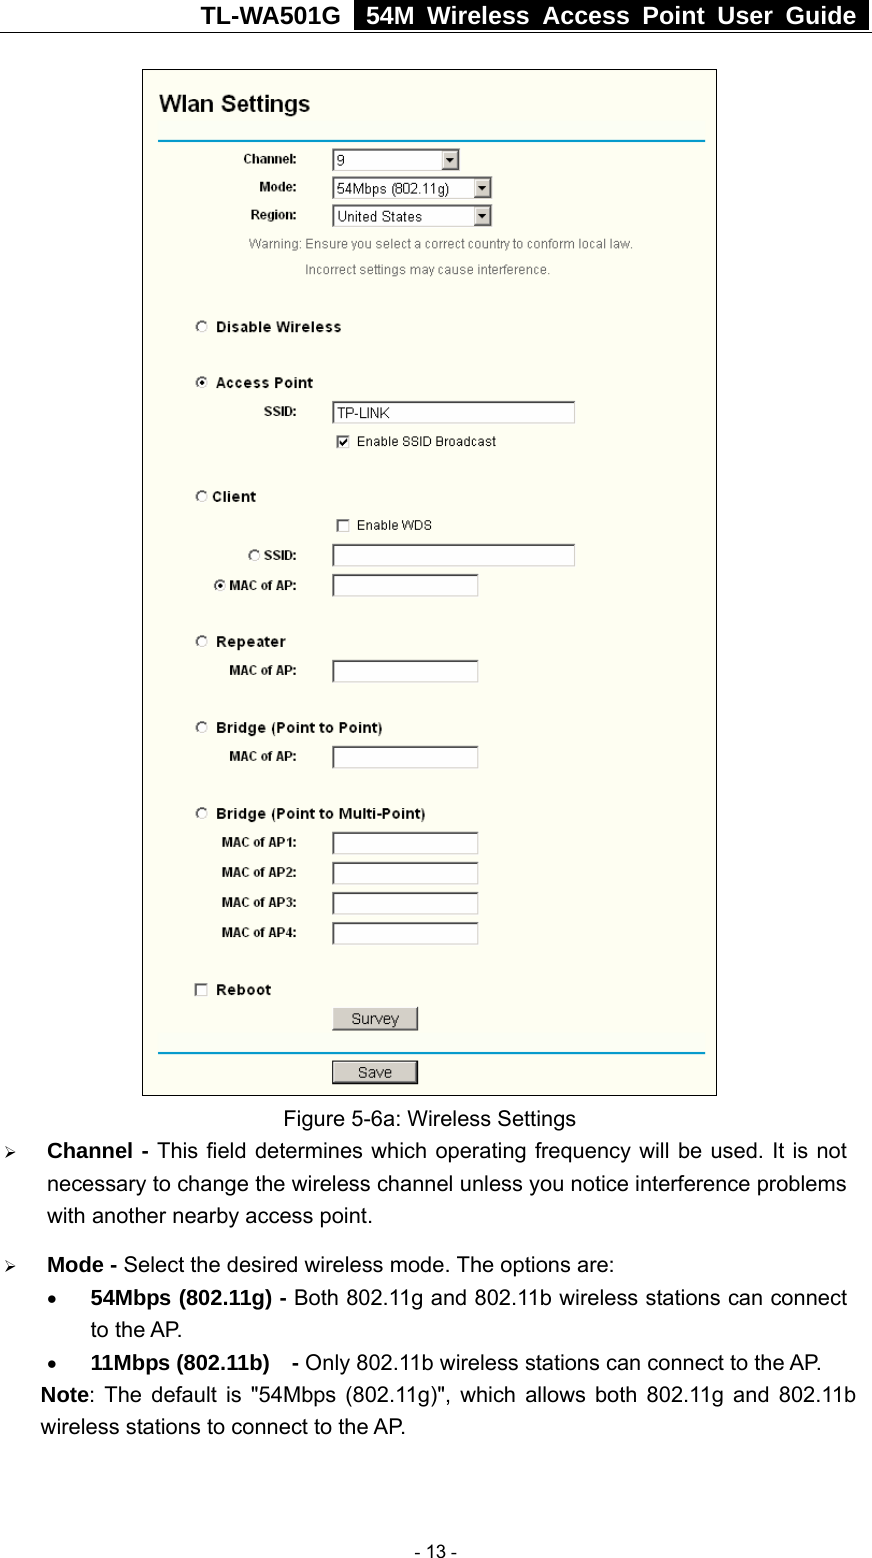 TL-WA501G   54M Wireless Access Point User Guide   Figure 5-6a: Wireless Settings ¾ Channel - This field determines which operating frequency will be used. It is not necessary to change the wireless channel unless you notice interference problems with another nearby access point. ¾ Mode - Select the desired wireless mode. The options are:   • 54Mbps (802.11g) - Both 802.11g and 802.11b wireless stations can connect to the AP. • 11Mbps (802.11b)  - Only 802.11b wireless stations can connect to the AP. Note: The default is &quot;54Mbps (802.11g)&quot;, which allows both 802.11g and 802.11b wireless stations to connect to the AP.  - 13 - 